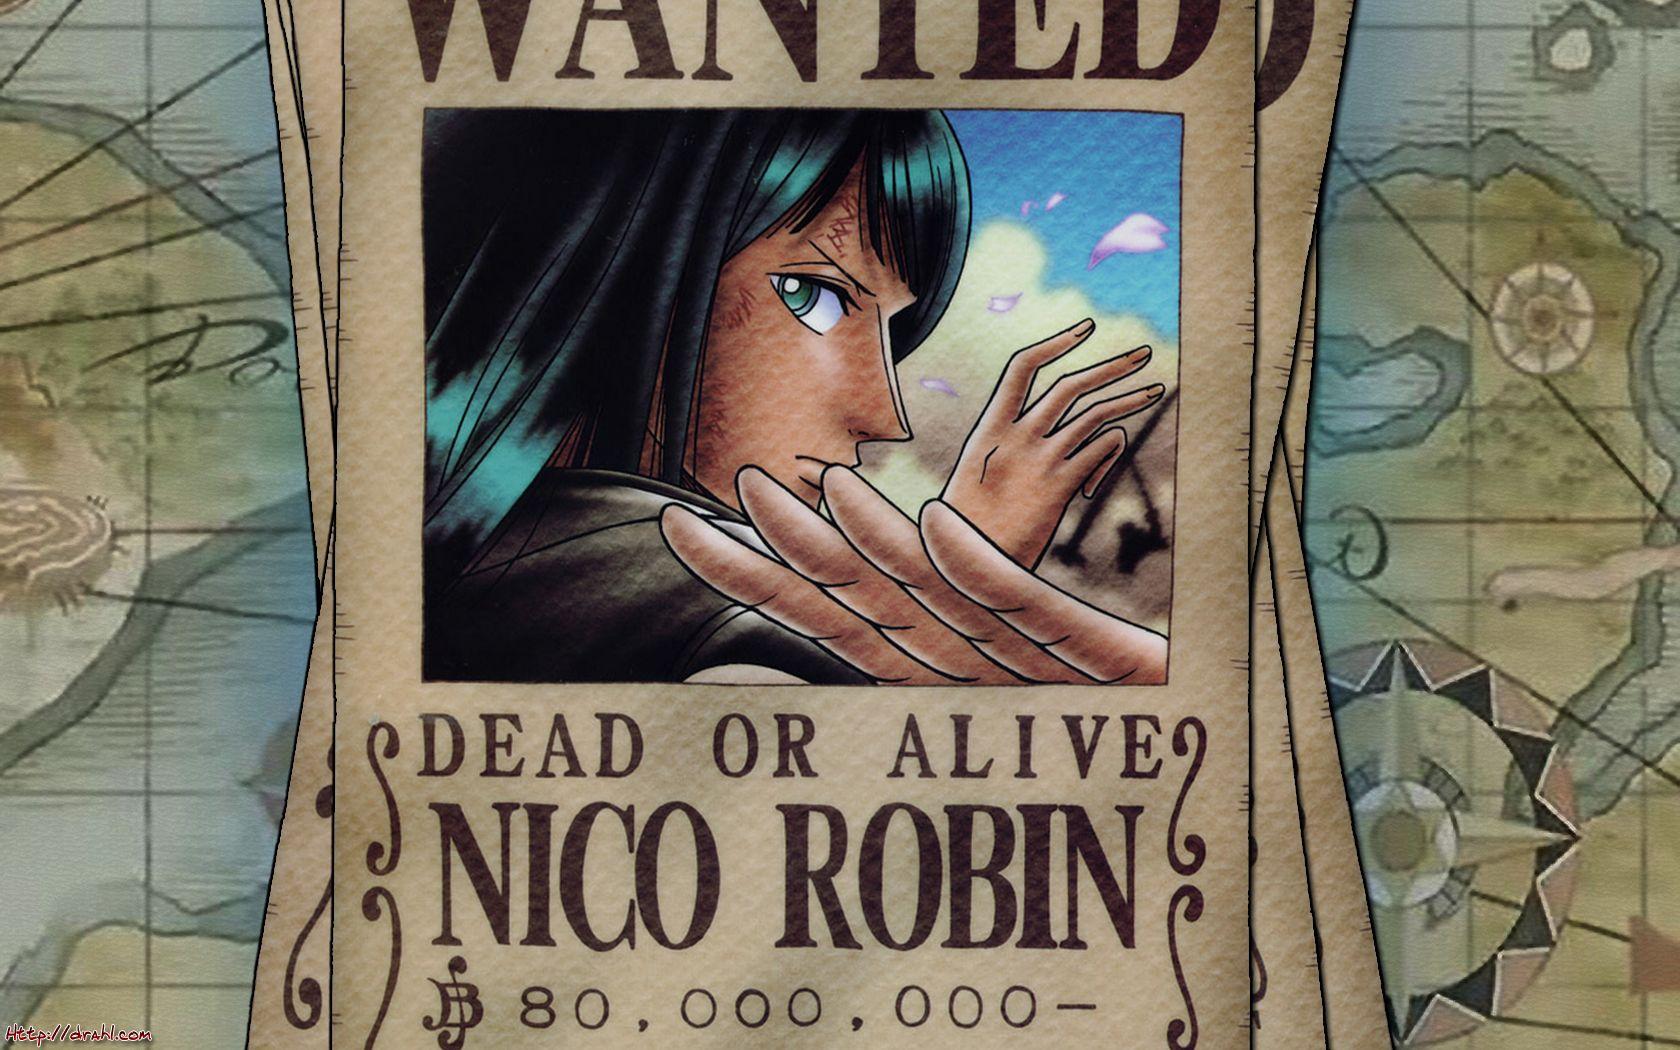 nico robin wanted poster Wallpaper Backgrounds